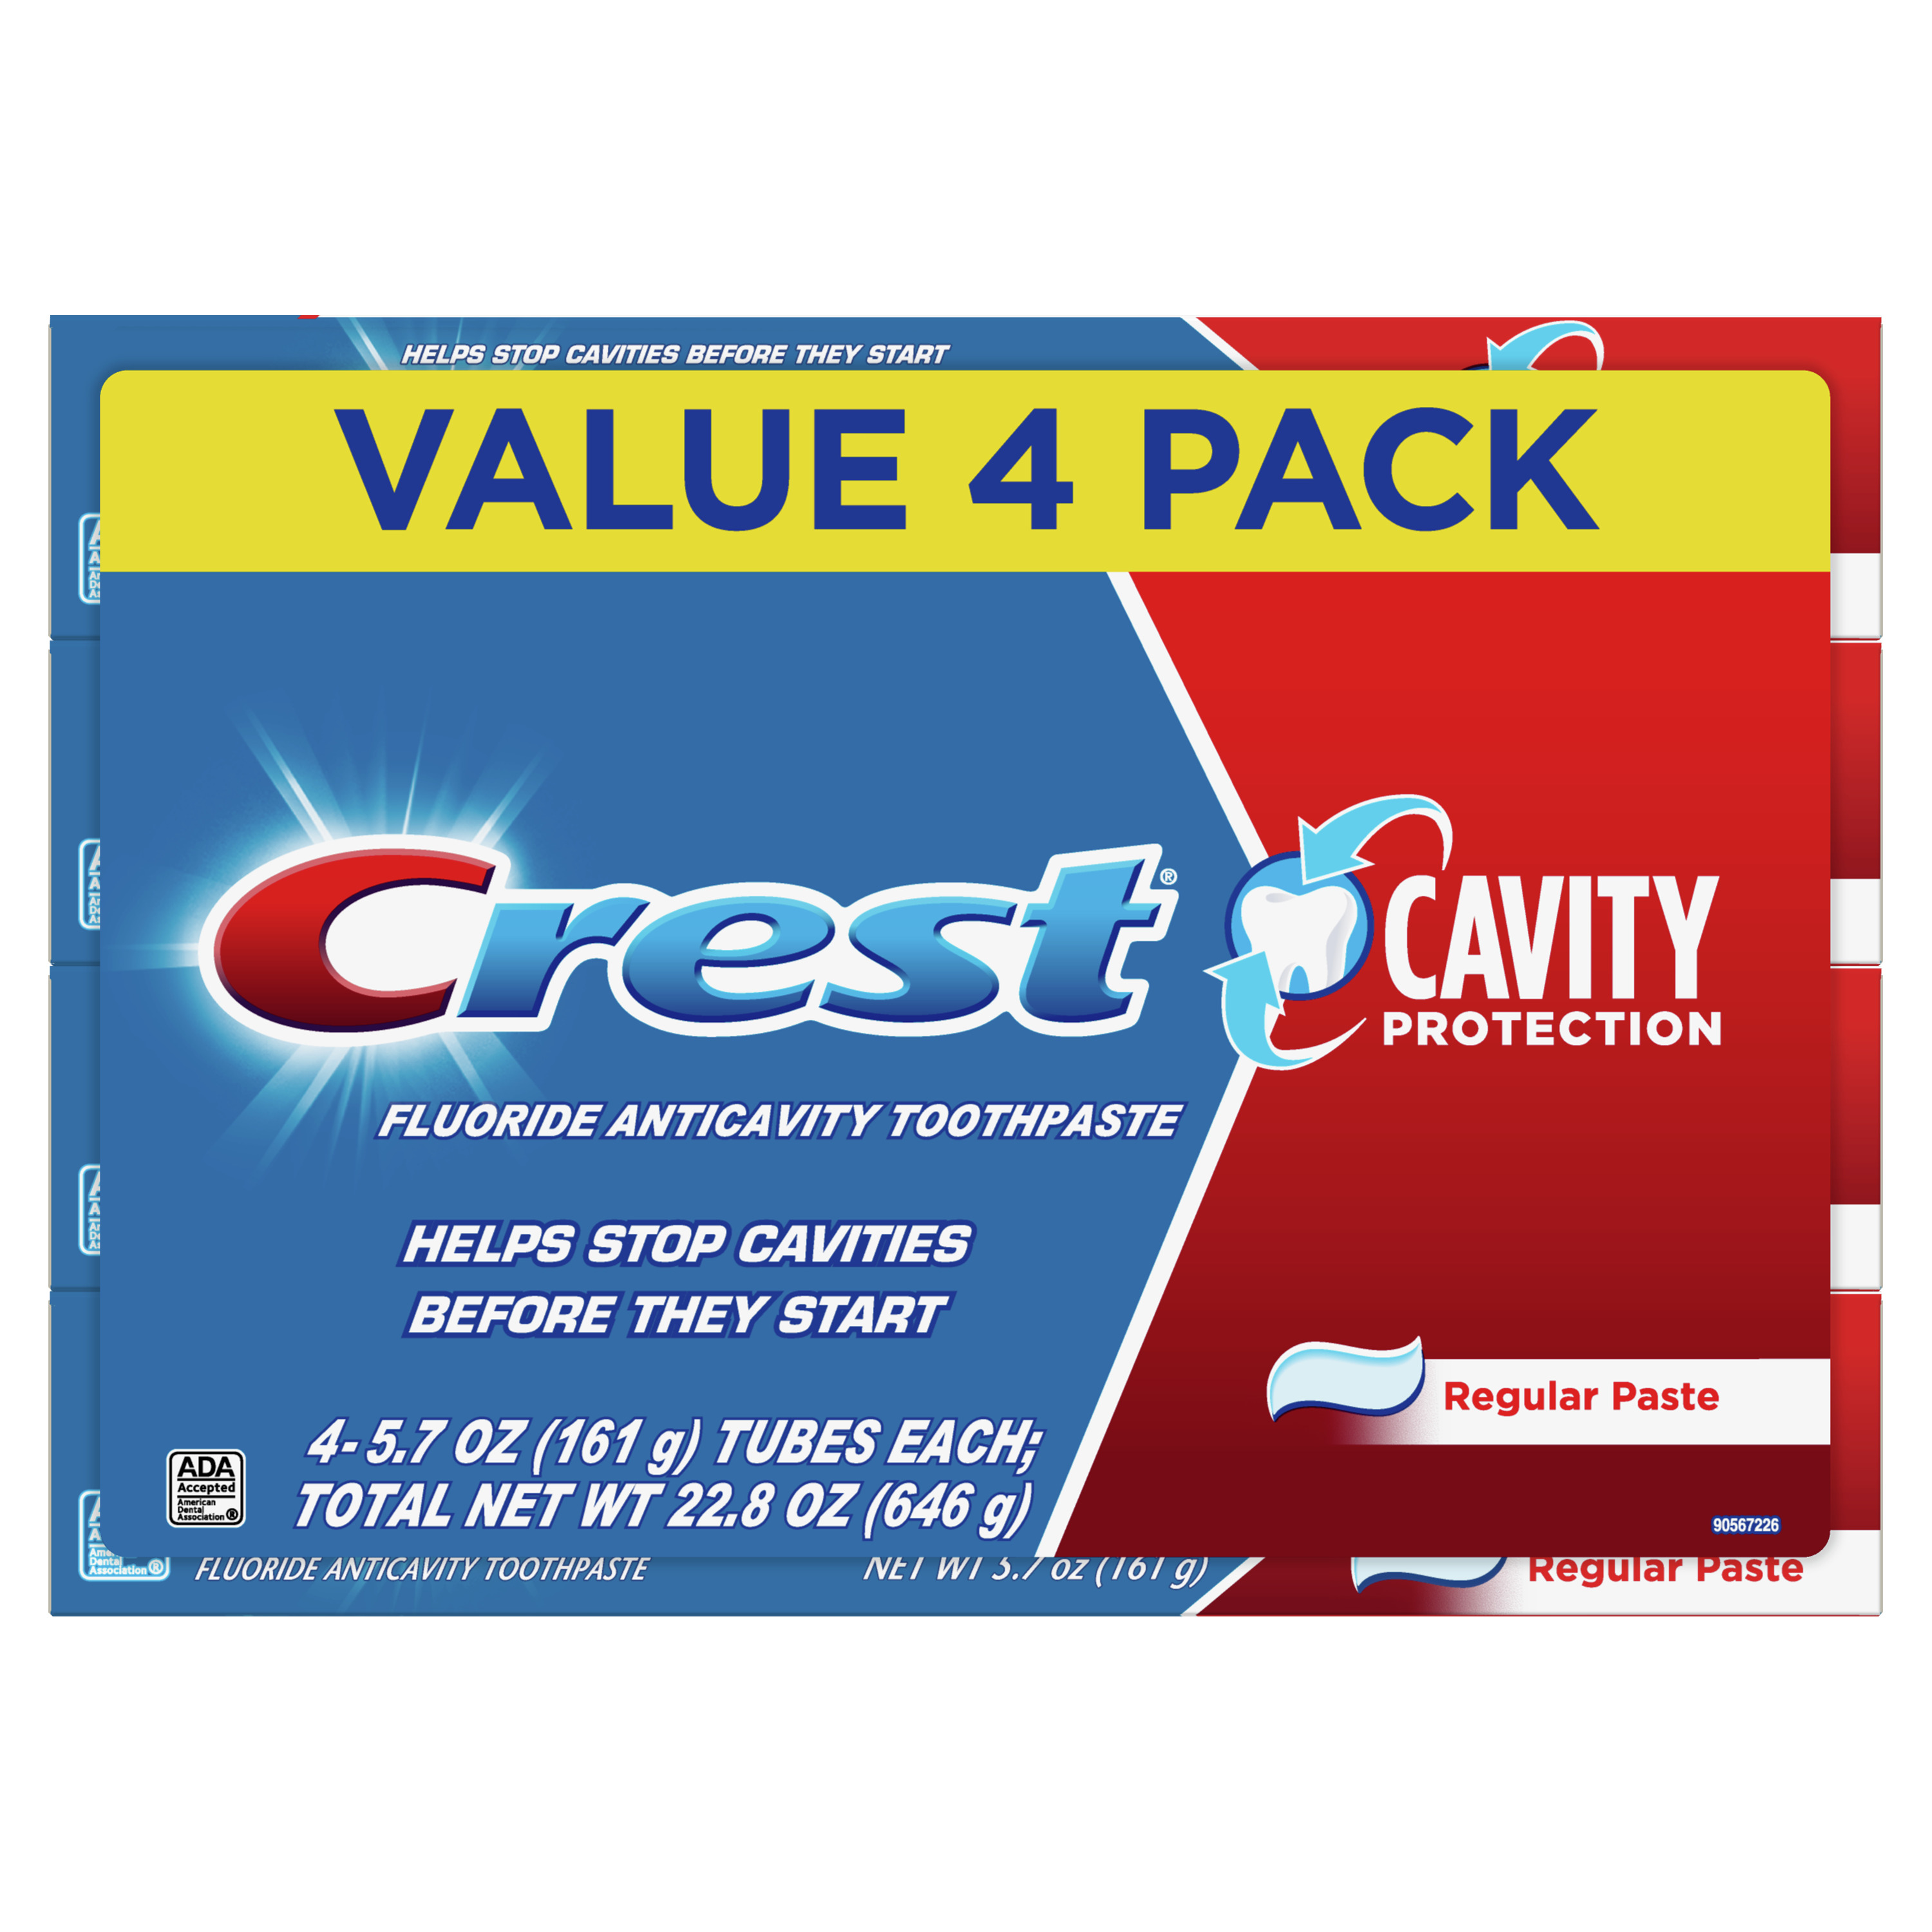 Crest Cavity Protection Toothpaste, Regular Paste, 5.7 oz, Pack of 4 - image 1 of 8